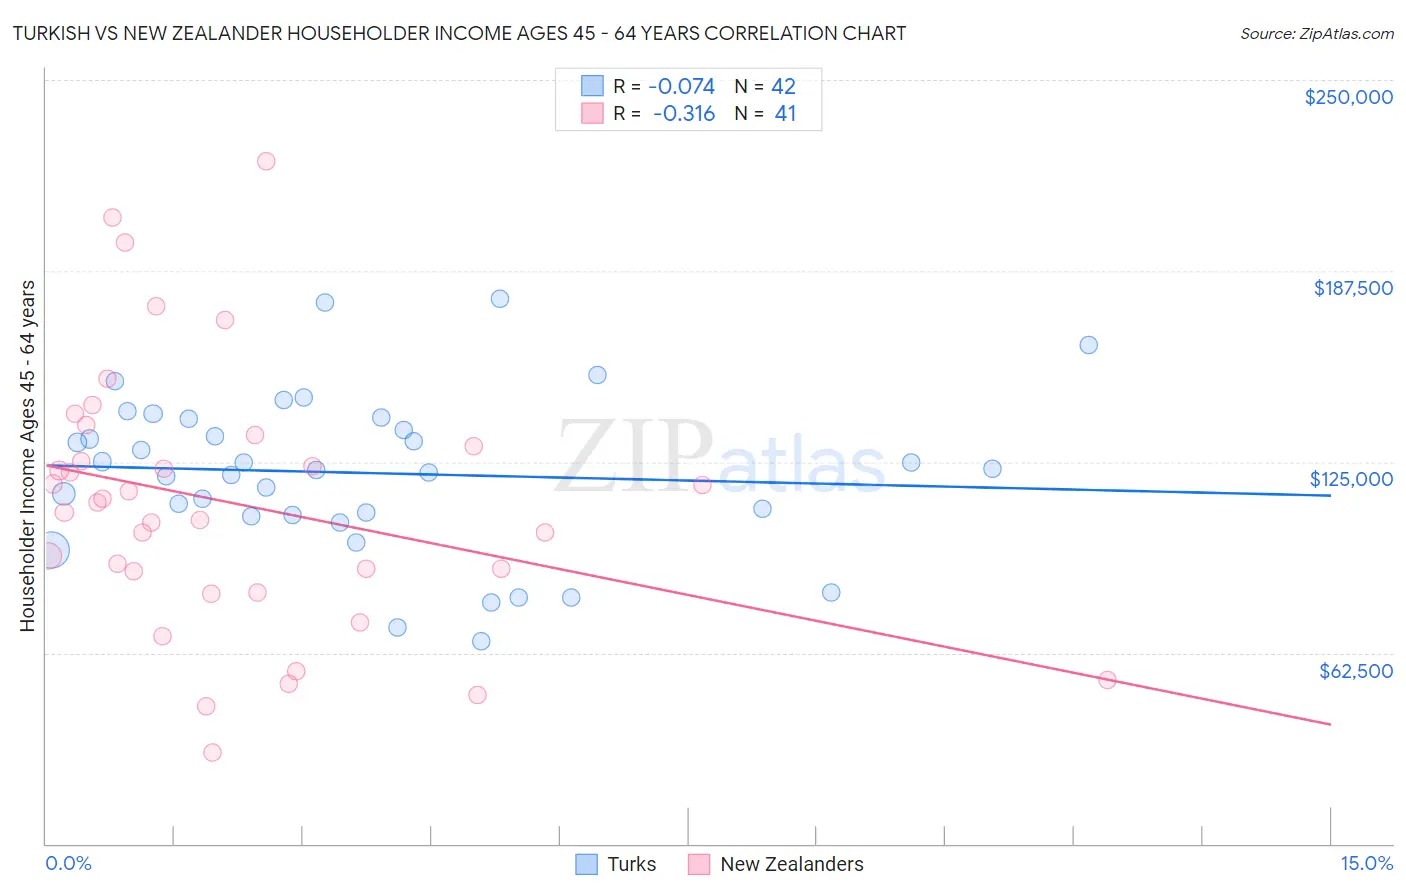 Turkish vs New Zealander Householder Income Ages 45 - 64 years